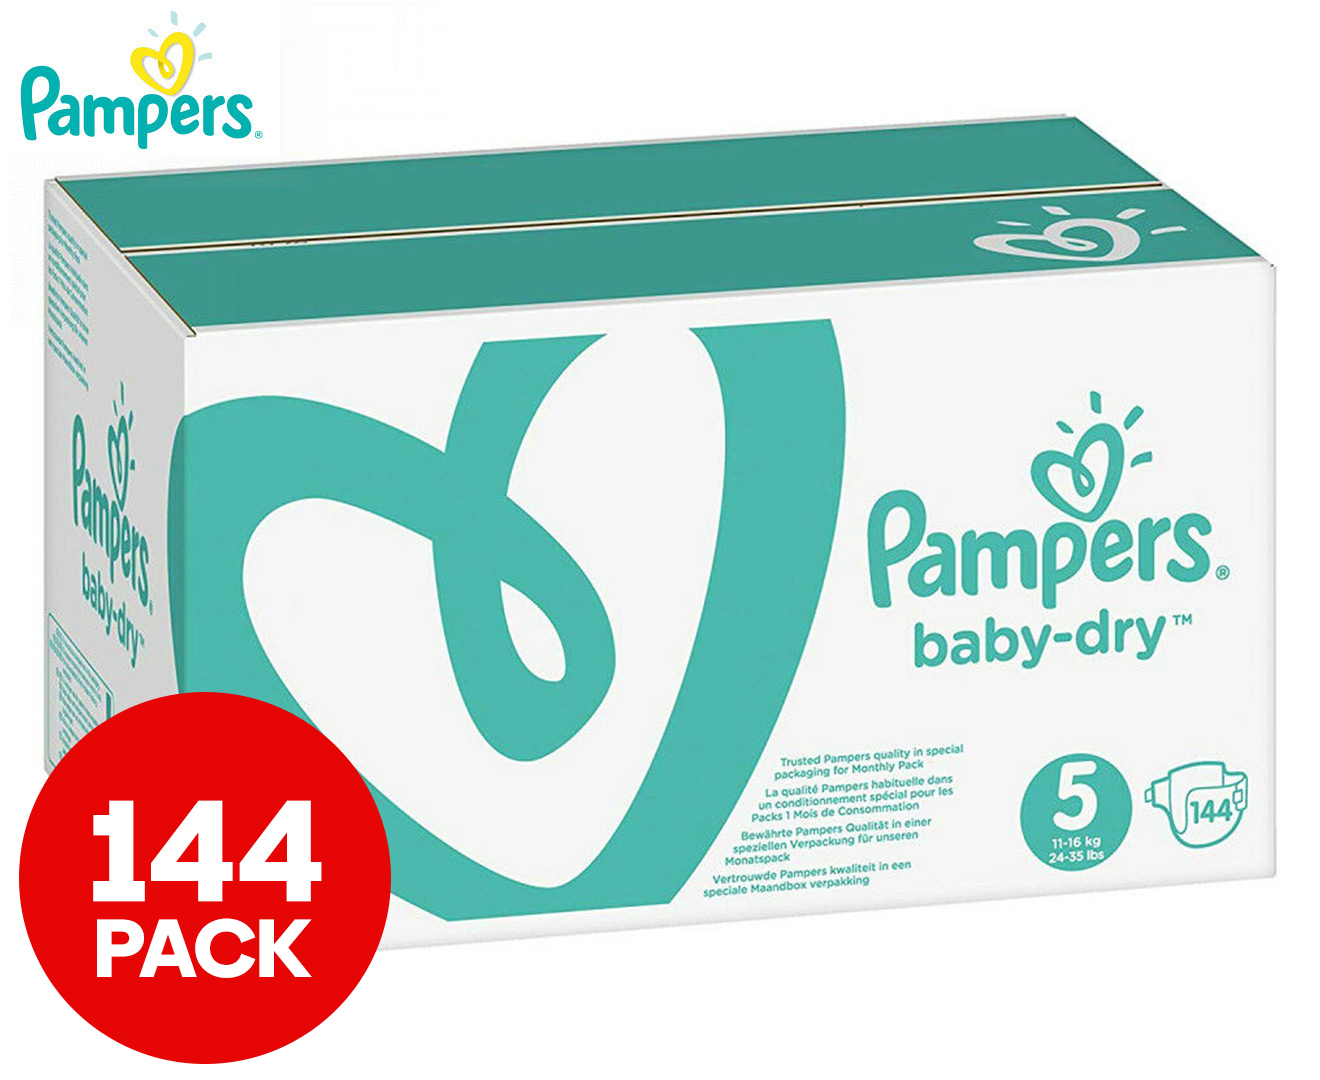 Pampers Baby-Dry Walker Nappies | Catch.com.au